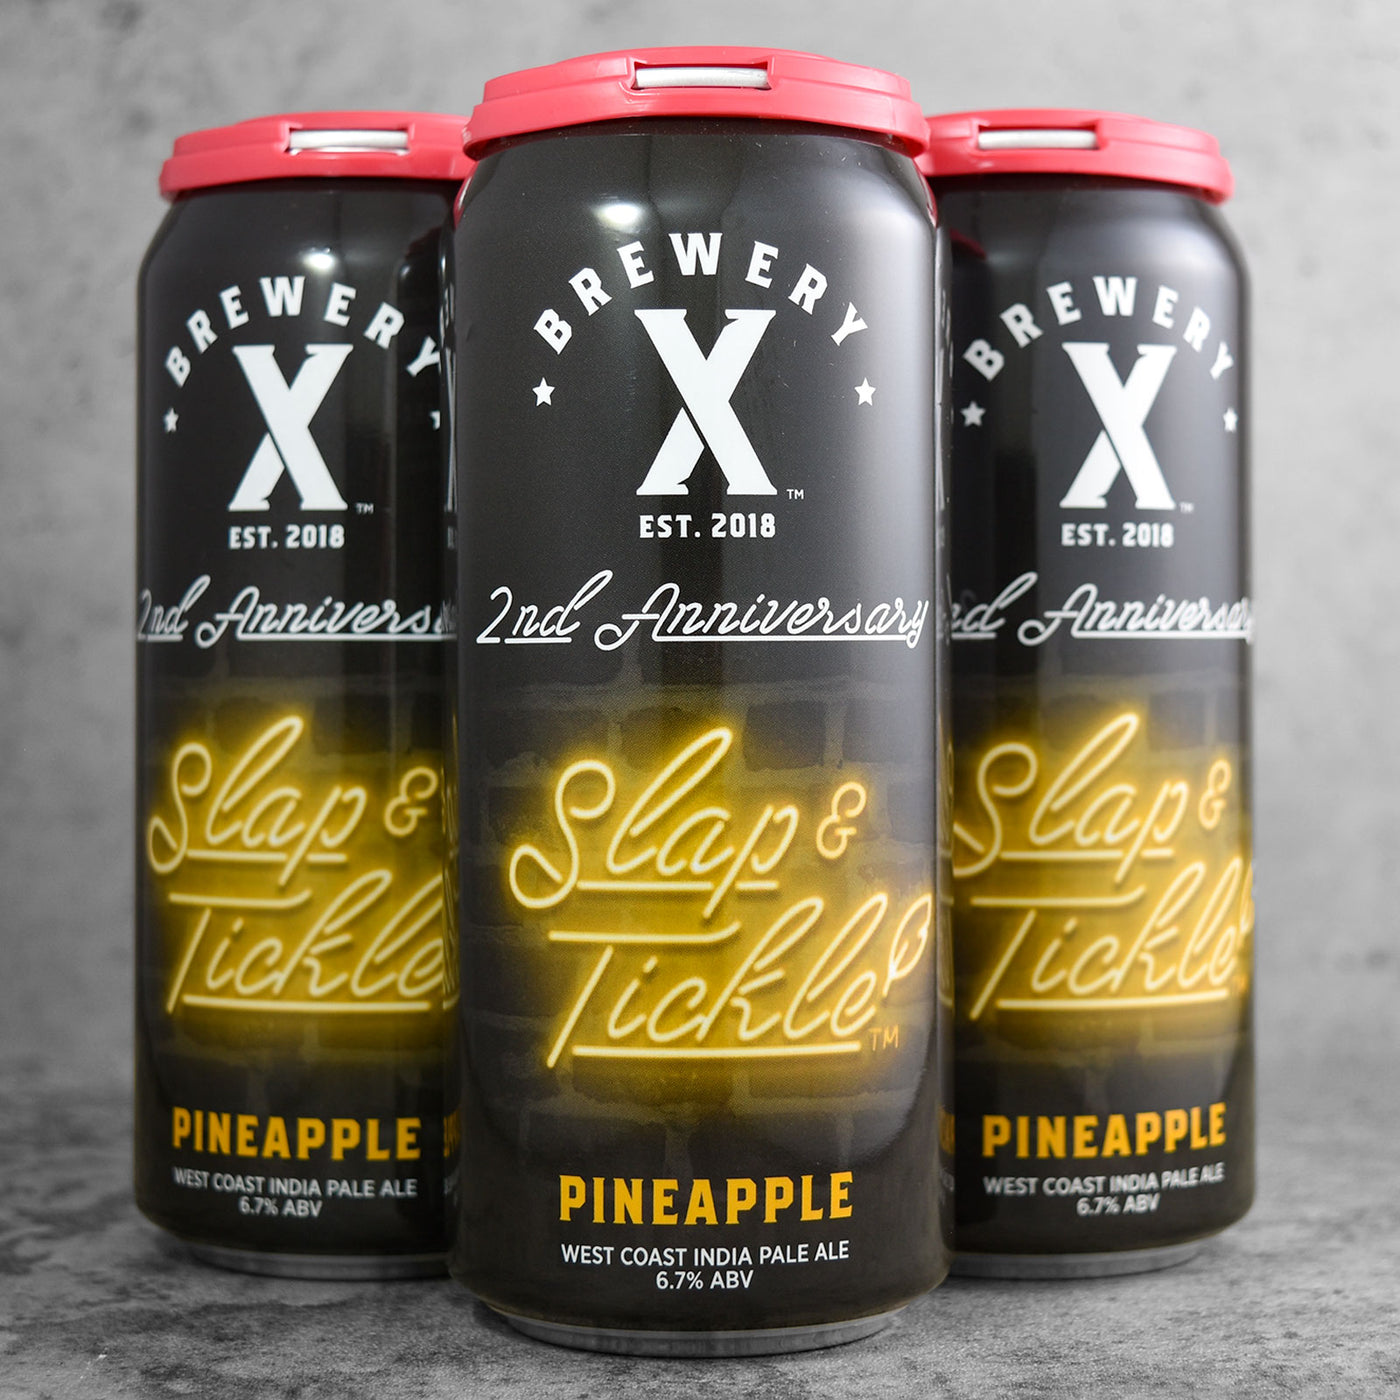 Brewery X Slap & Tickle (2nd Anniversary Edition)